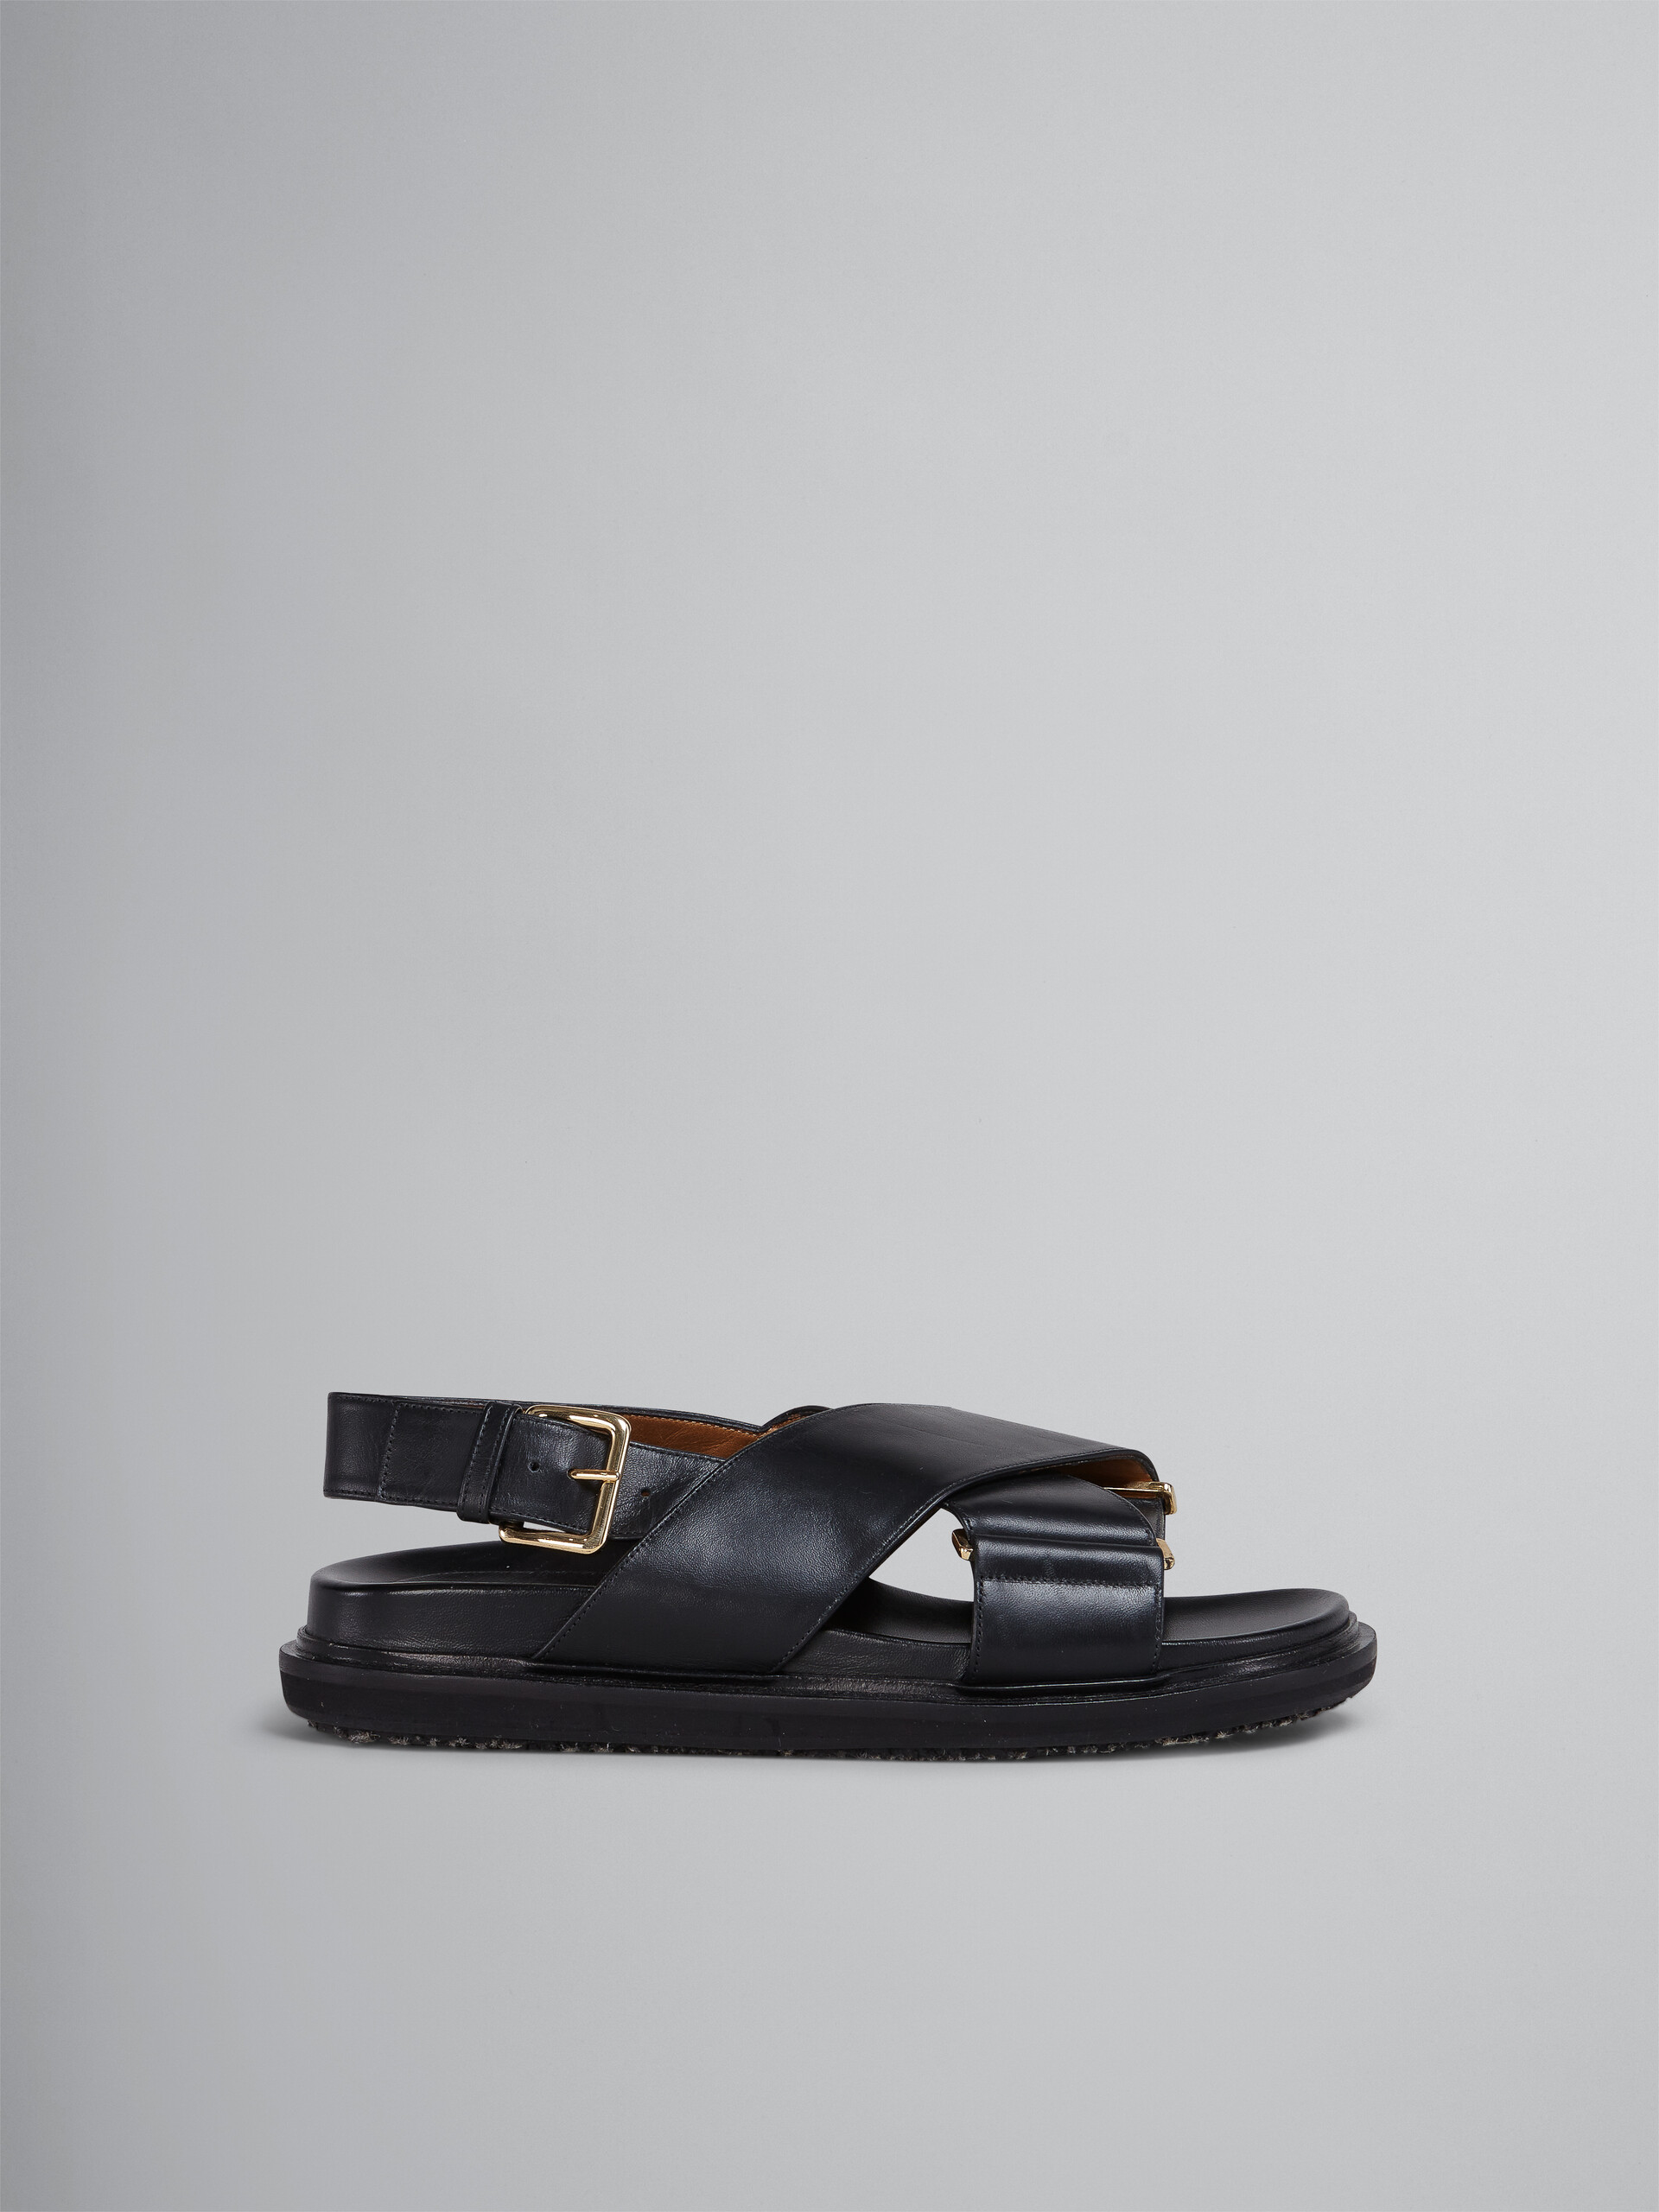 Black smooth calf leather fussbett - Sandals - Image 1